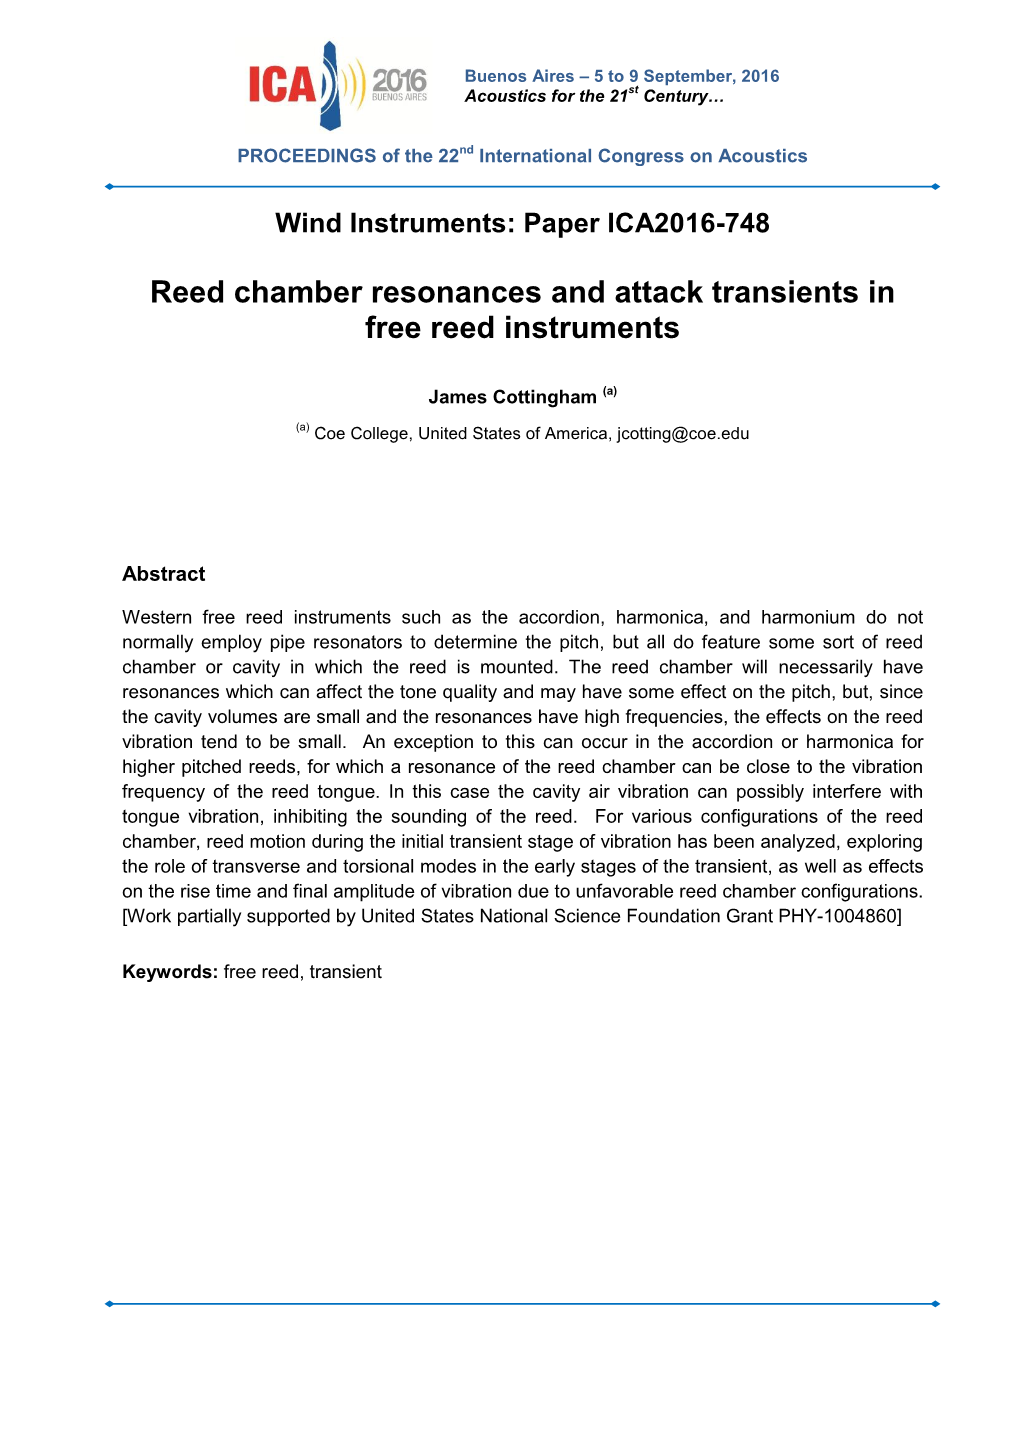 Reed Chamber Resonances and Attack Transients in Free Reed Instruments